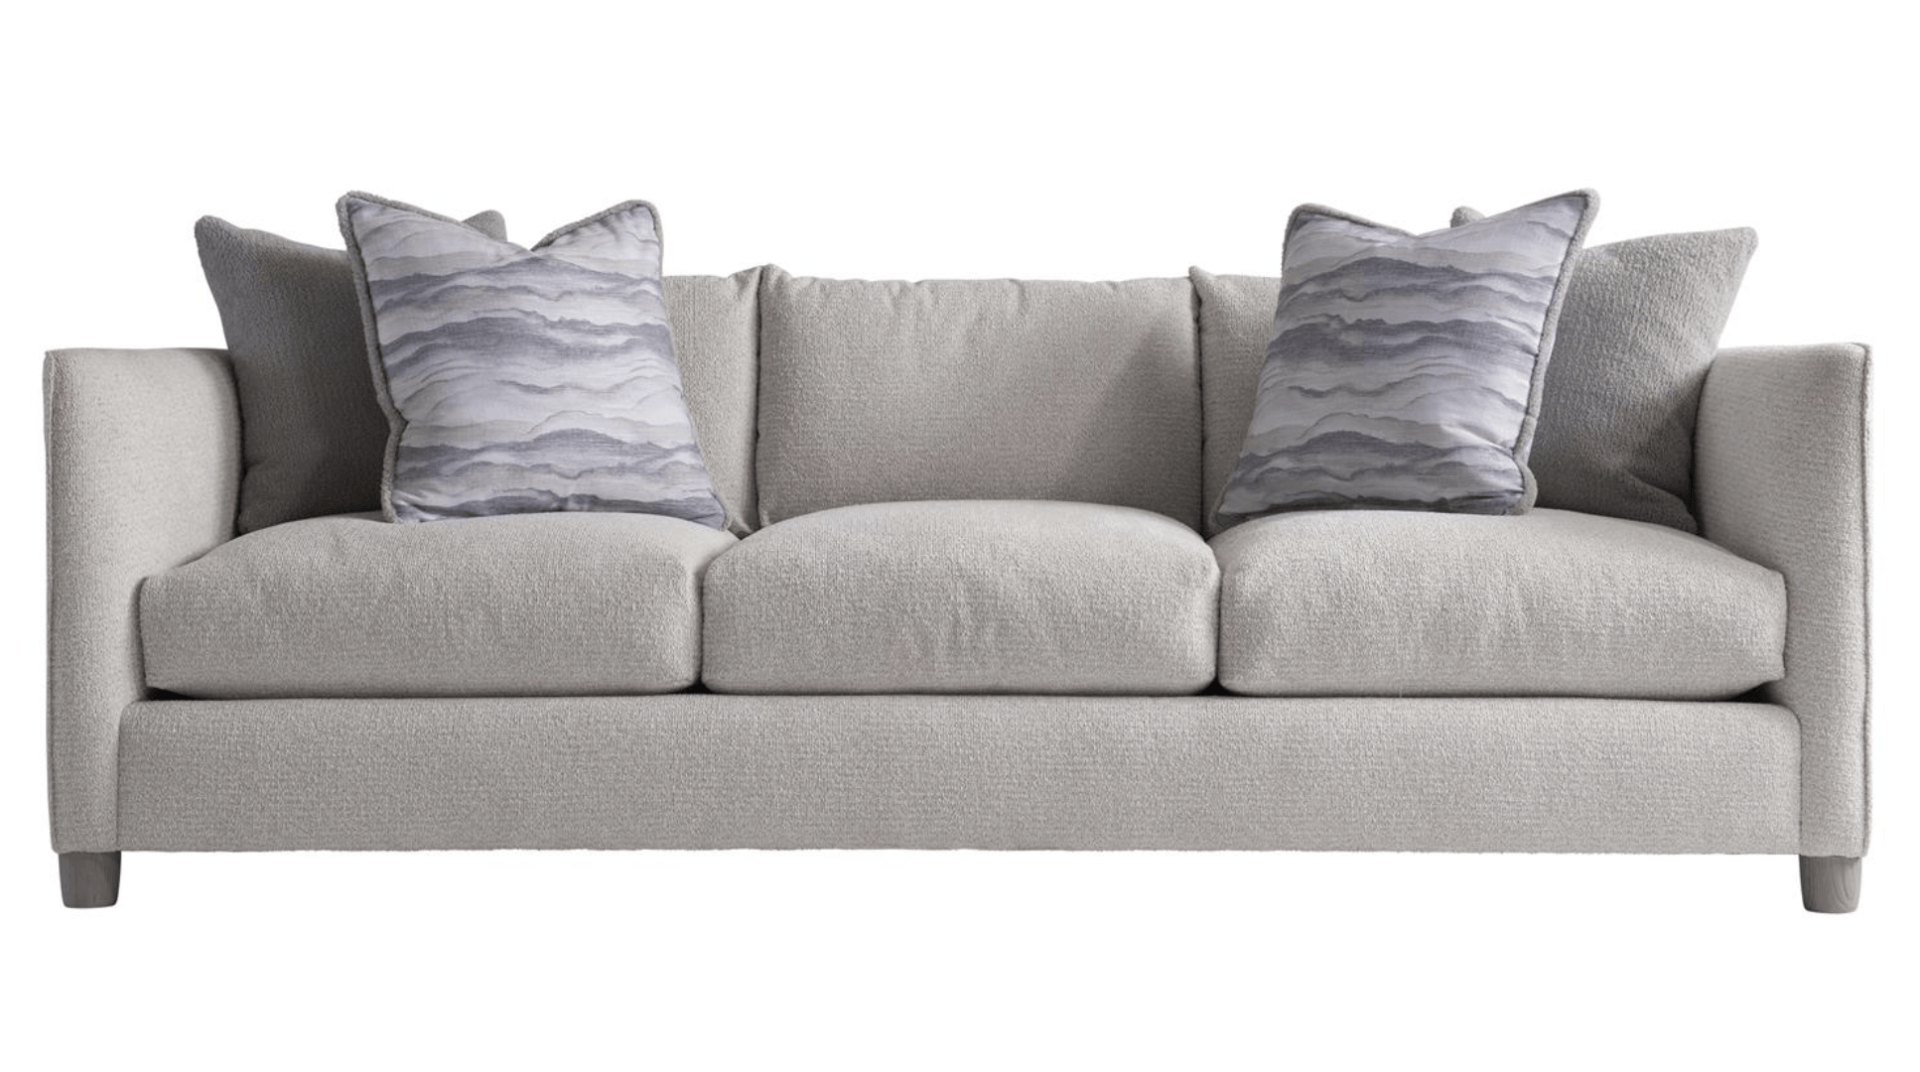 a grey couch with two pillows on it on a white background .